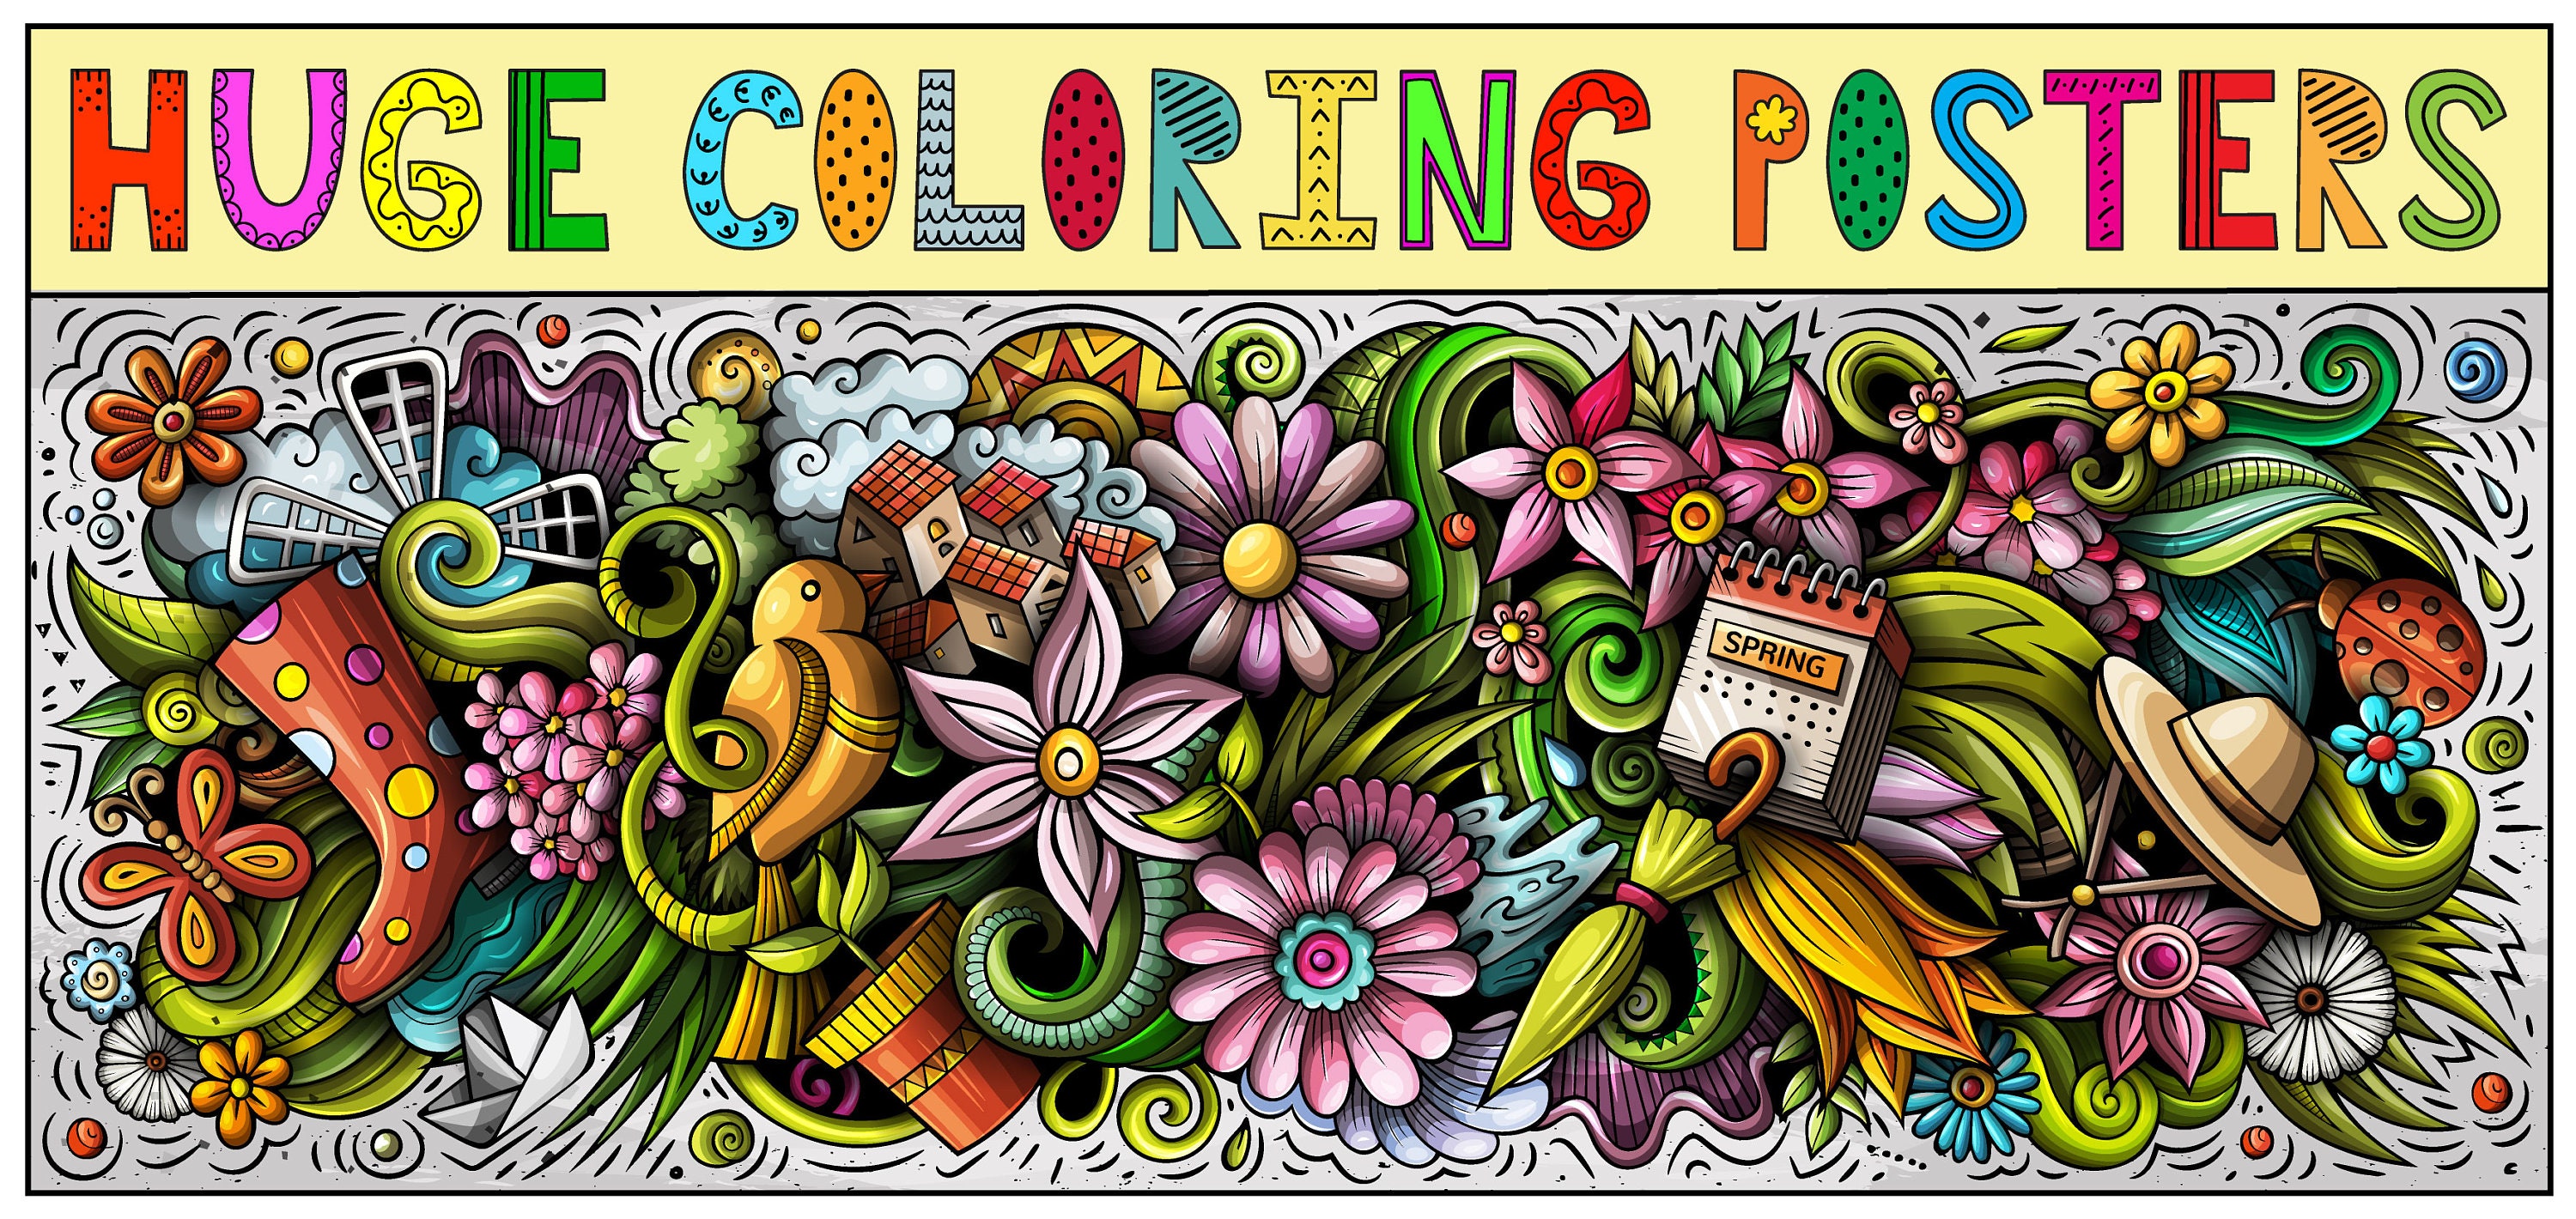 Kindness Coloring Poster, Huge Coloring Poster, Landscape Coloring Poster,  Kindness 